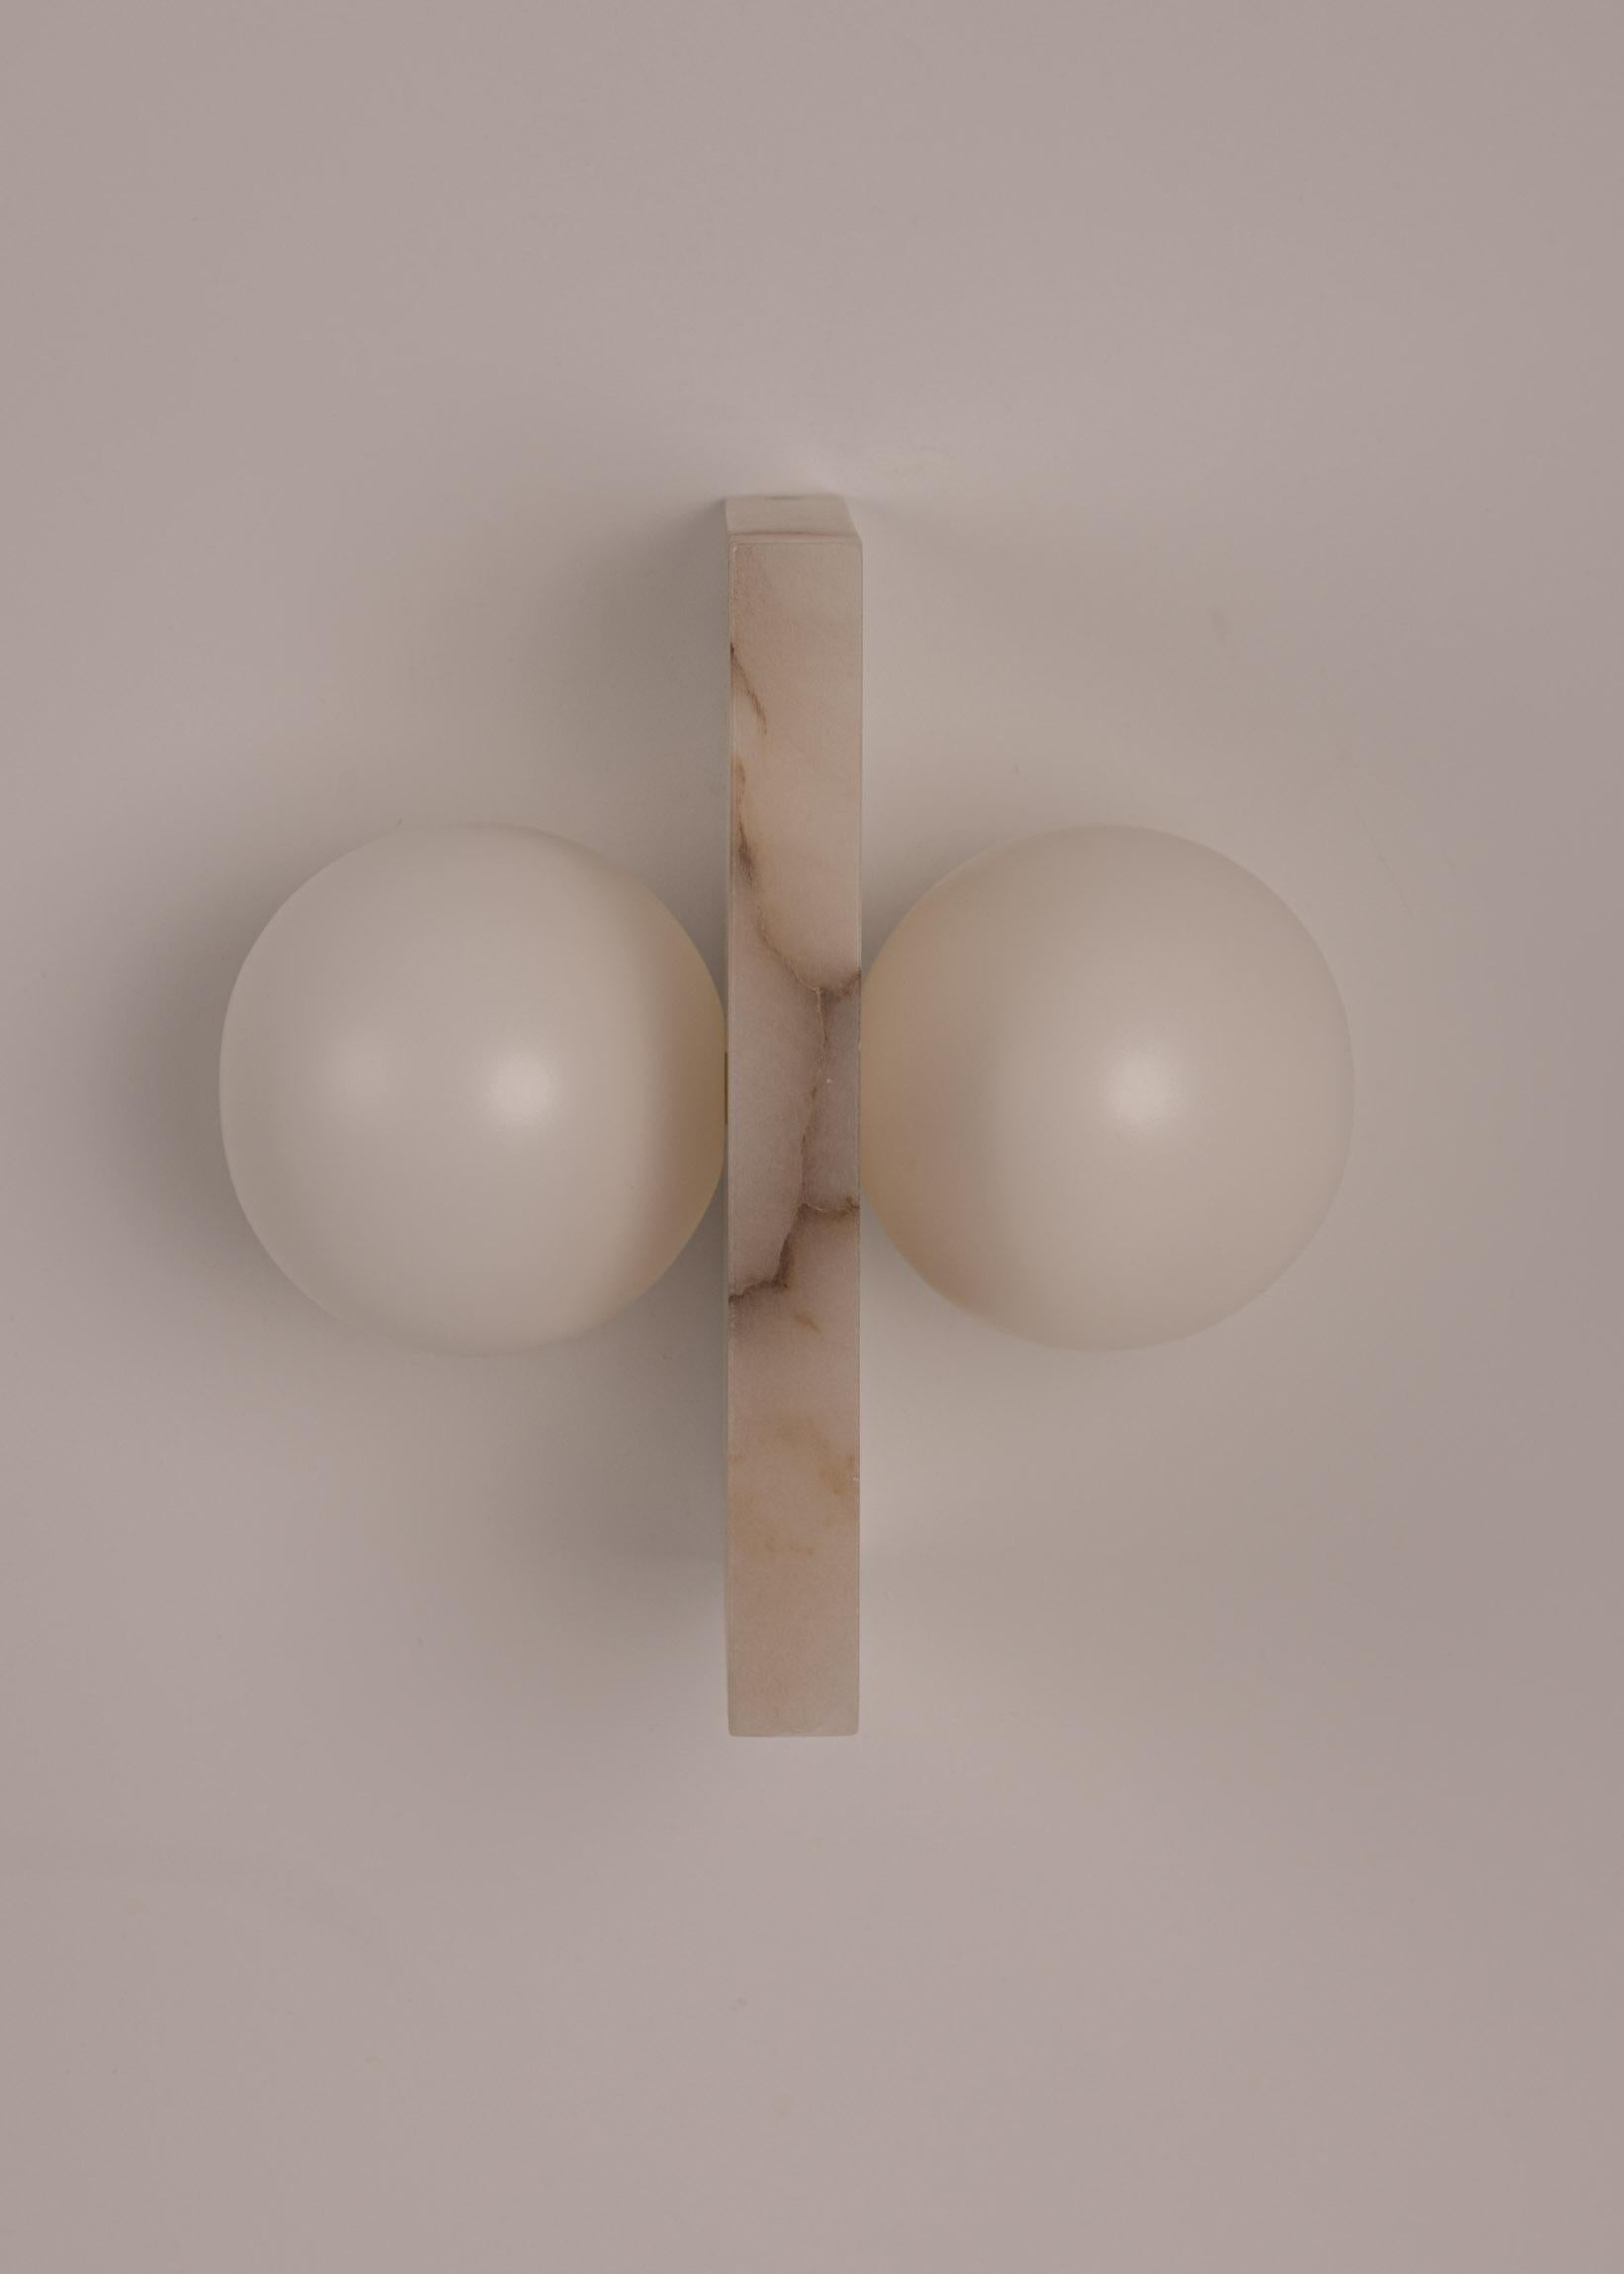 Fluji White Alabaster Wall Sconce by Simone & Marcel
Dimensions: D 20 x W 32 x H 30 cm.
Materials: White alabaster.

Available in different brass and alabaster options and finishes. Custom options available on request. Please contact us. 

All our